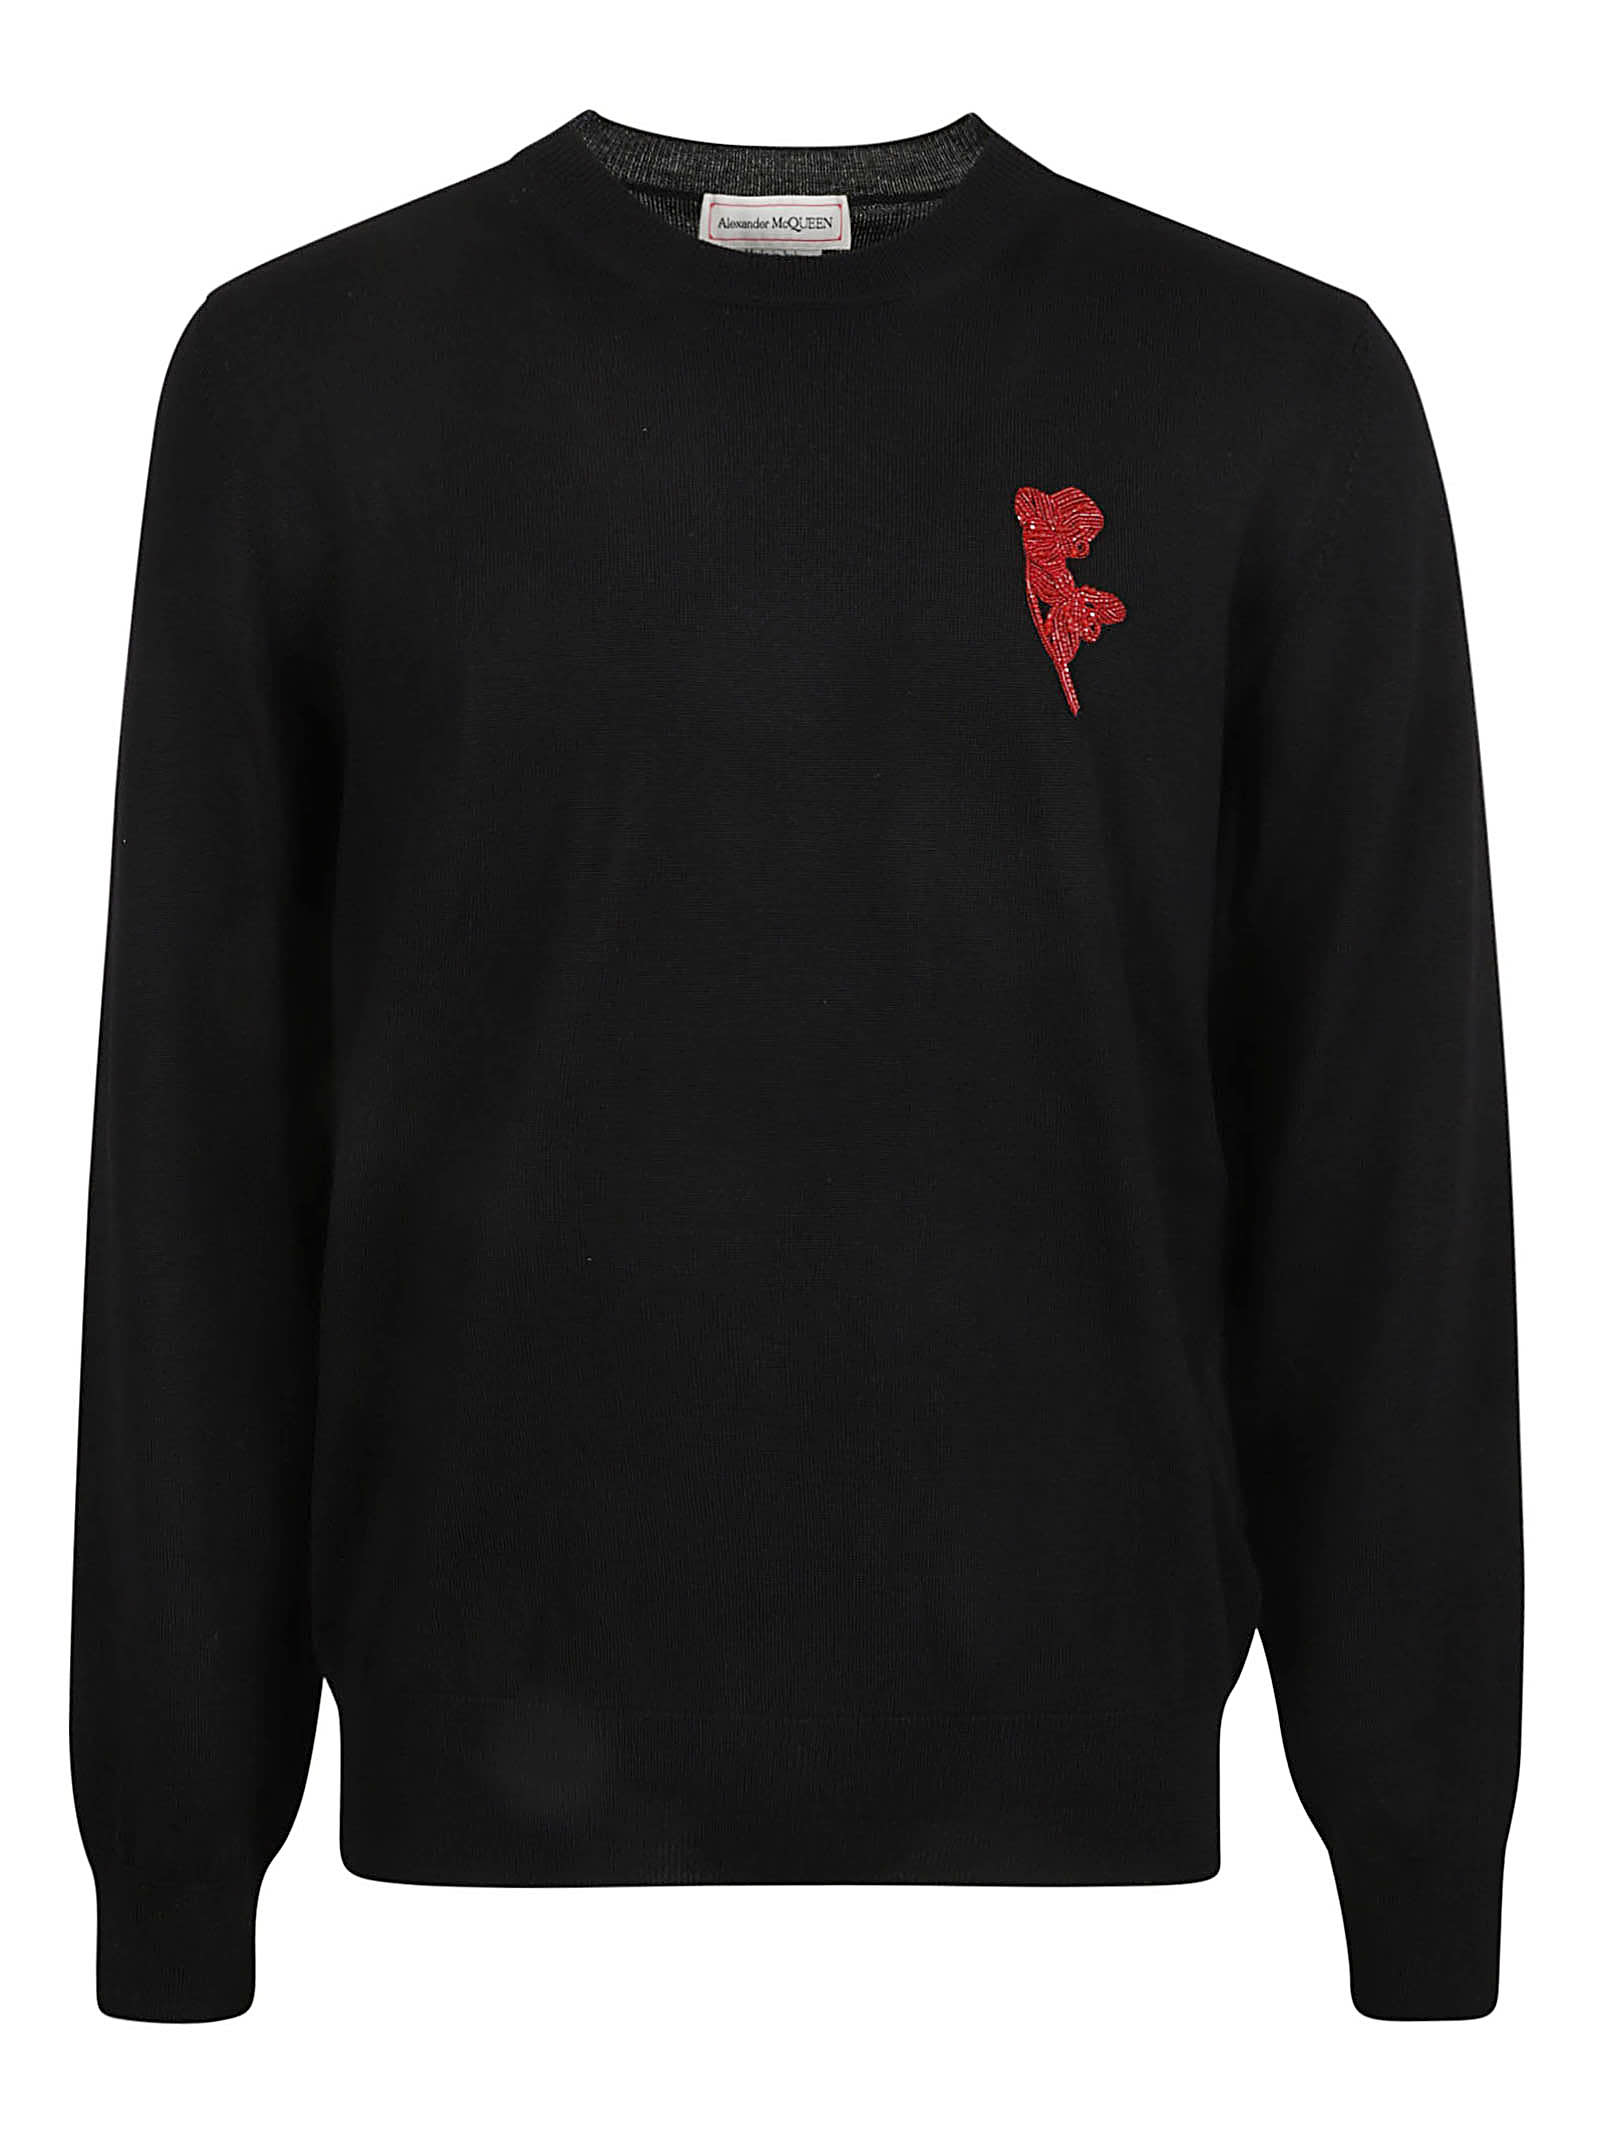 ALEXANDER MCQUEEN EMBROIDERED RIB KNIT SWEATER